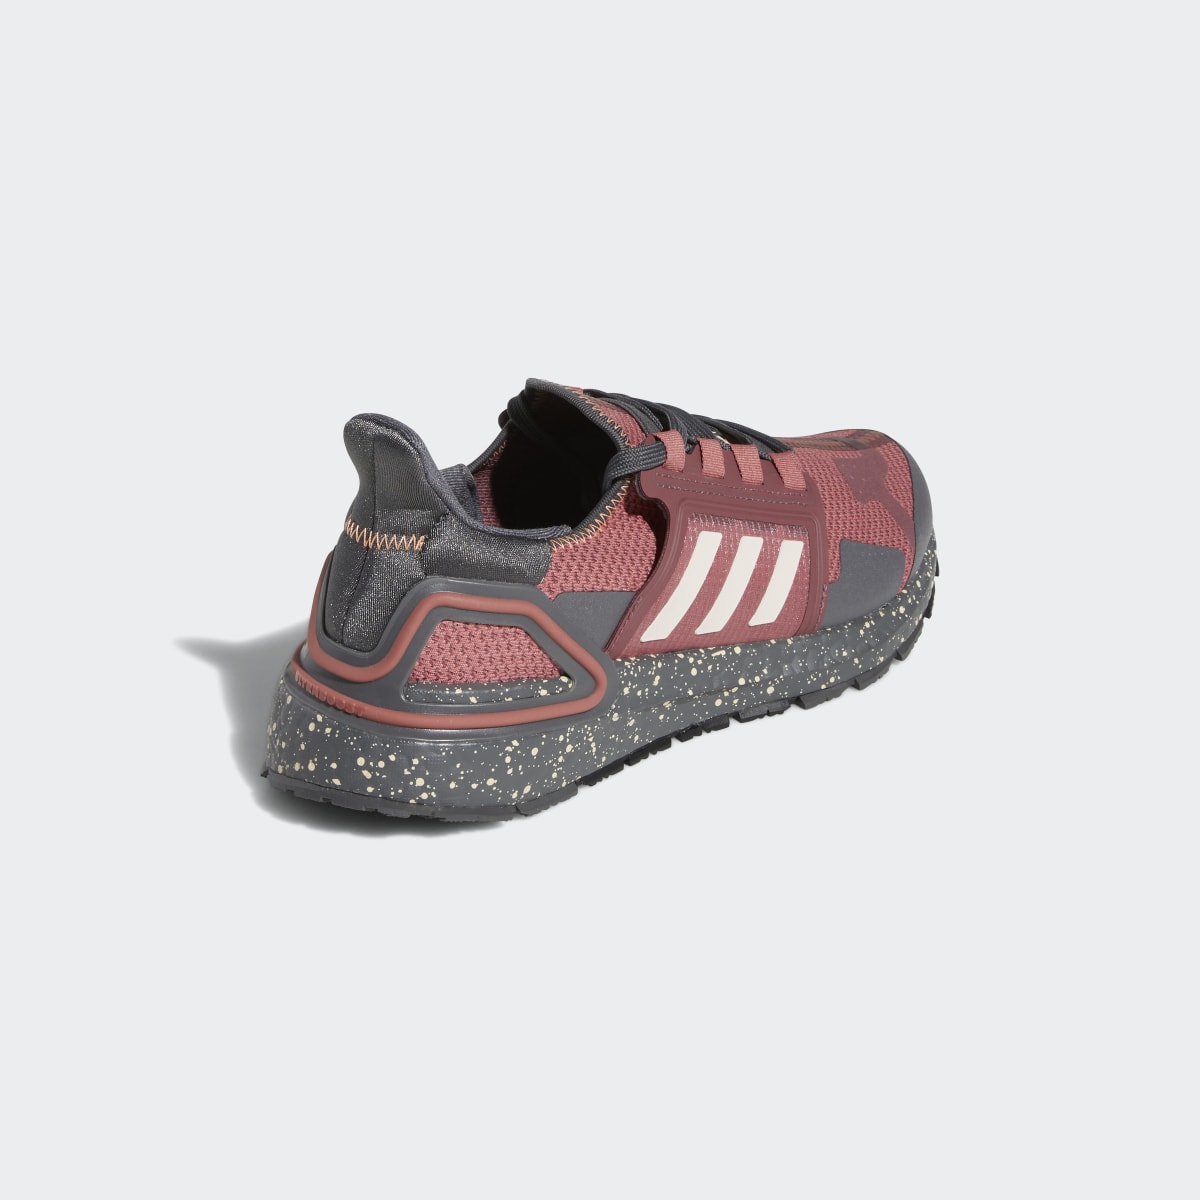 Adidas Ultraboost DNA City Explorer Outdoor Trail Running Sportswear Lifestyle Shoes. 6